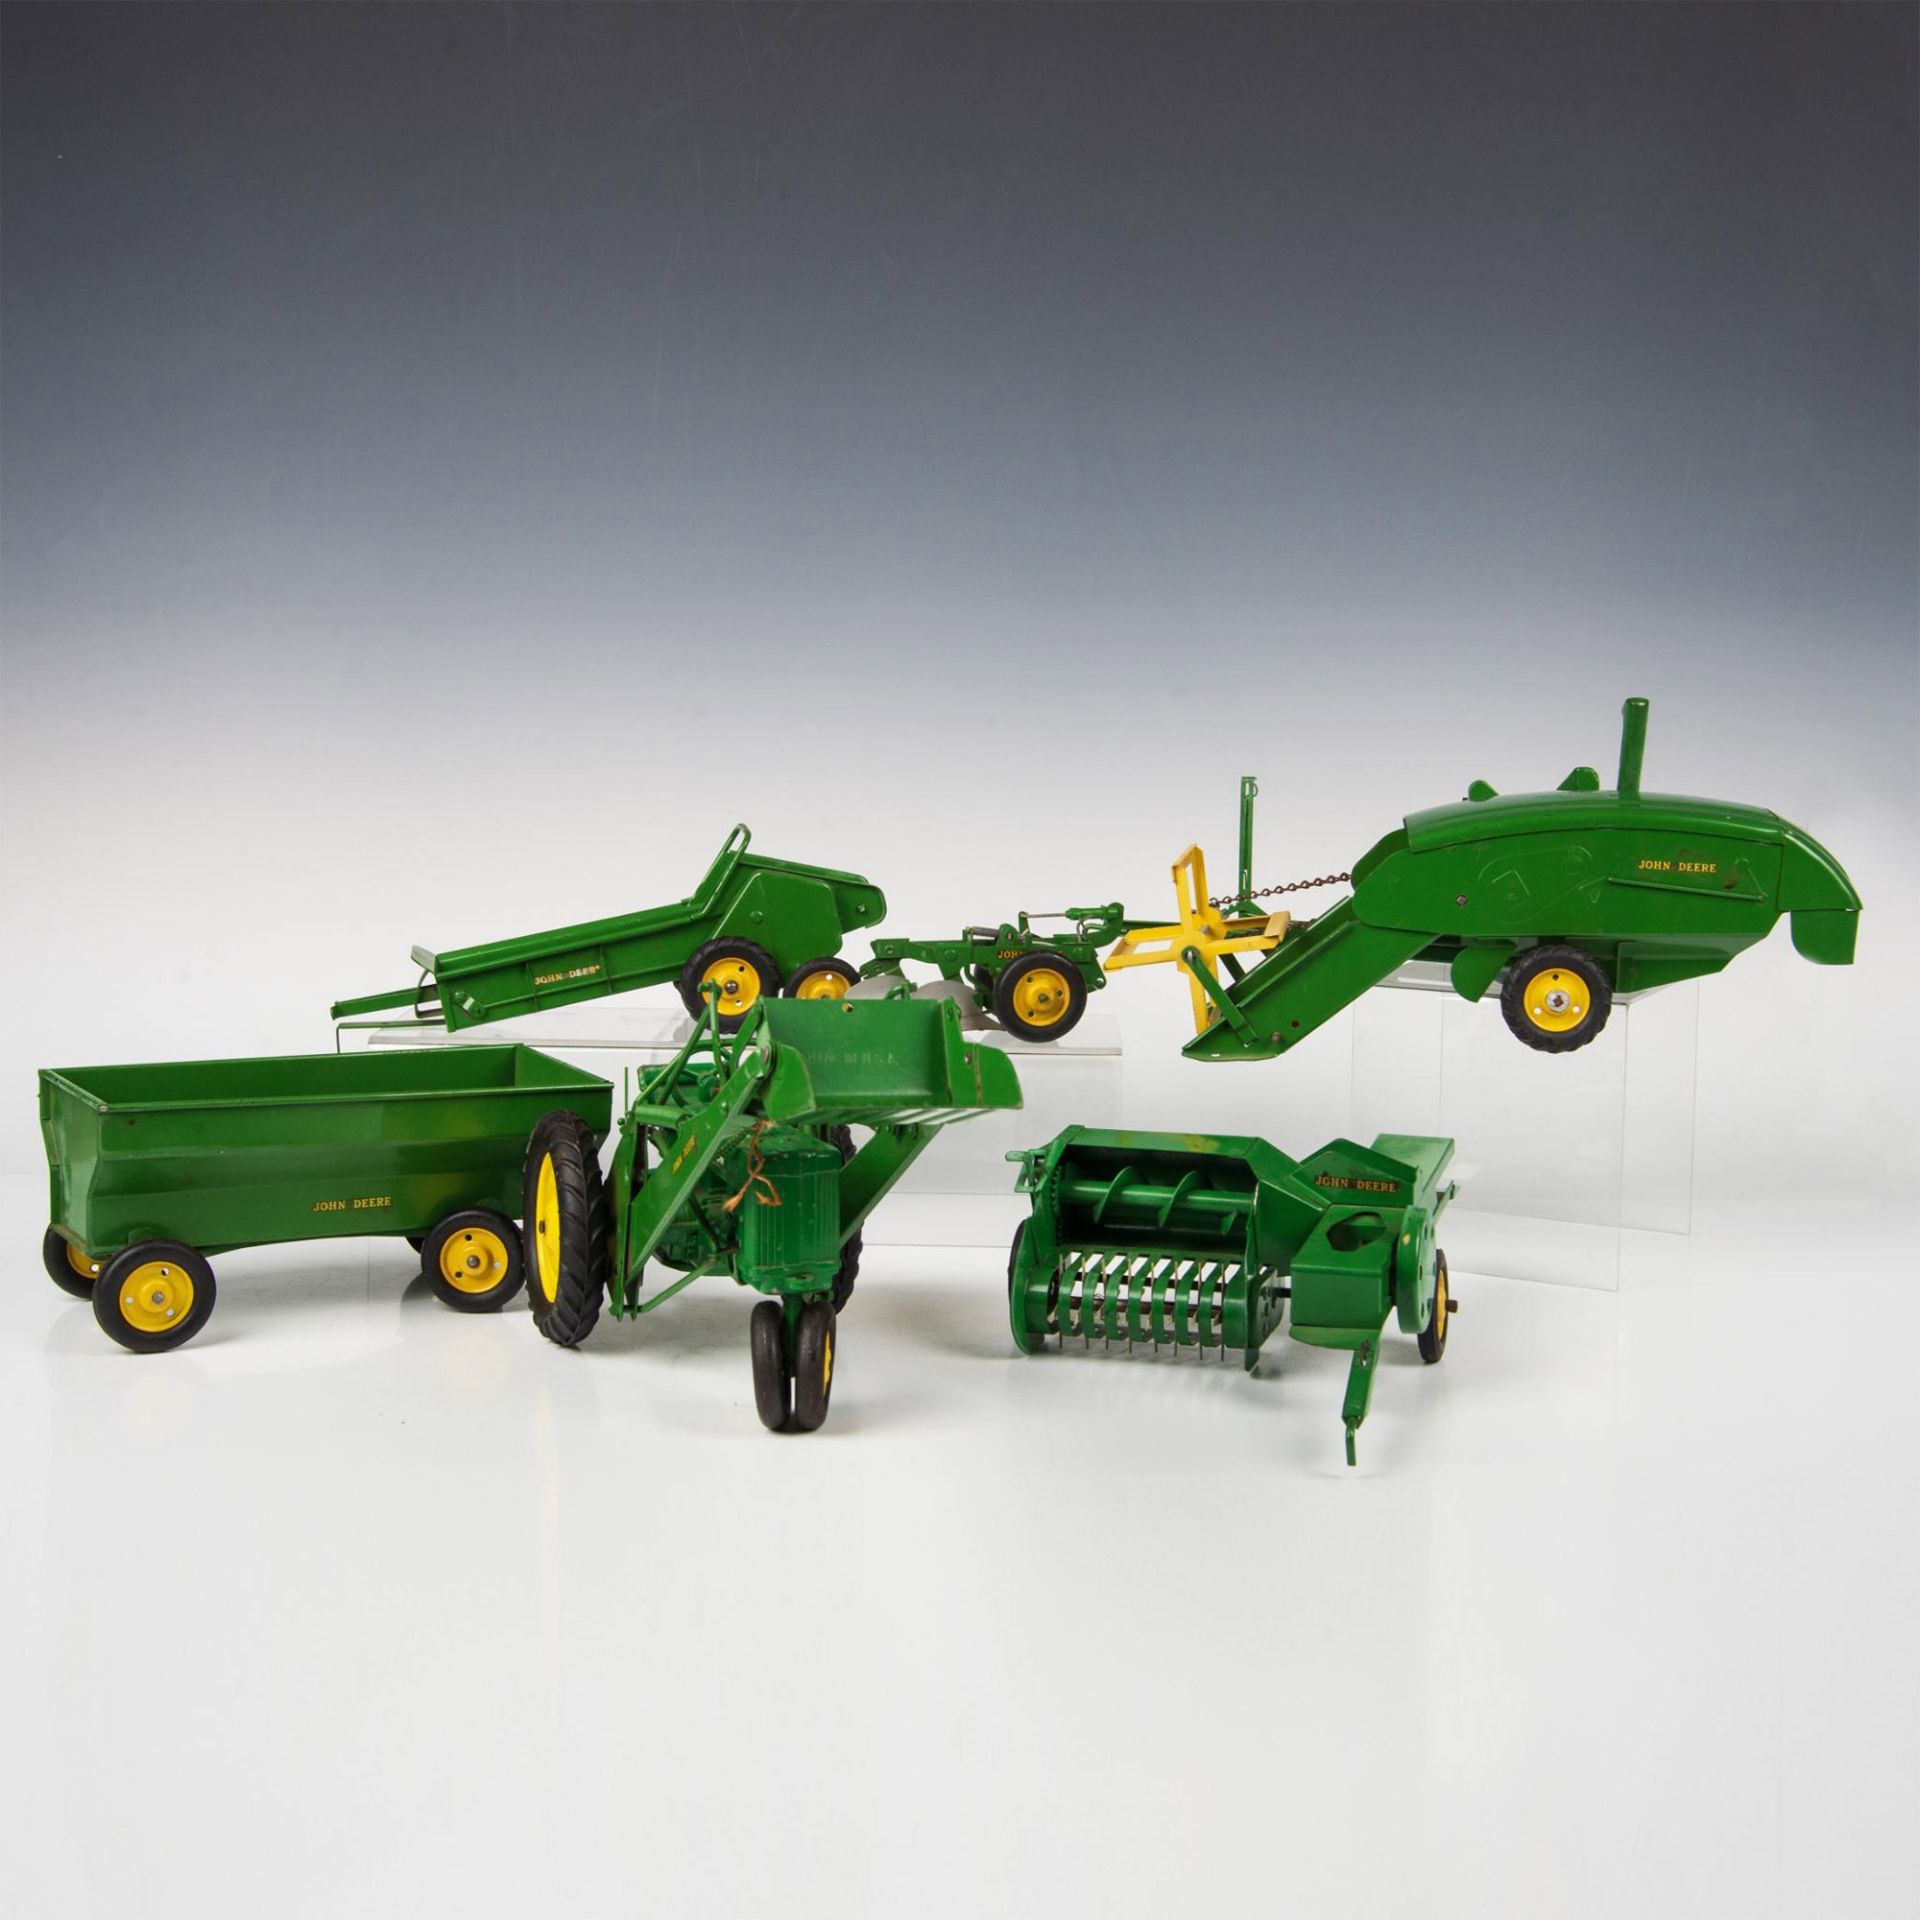 6pc John Deere Metal Toy Tractor and Equipment - Image 2 of 8